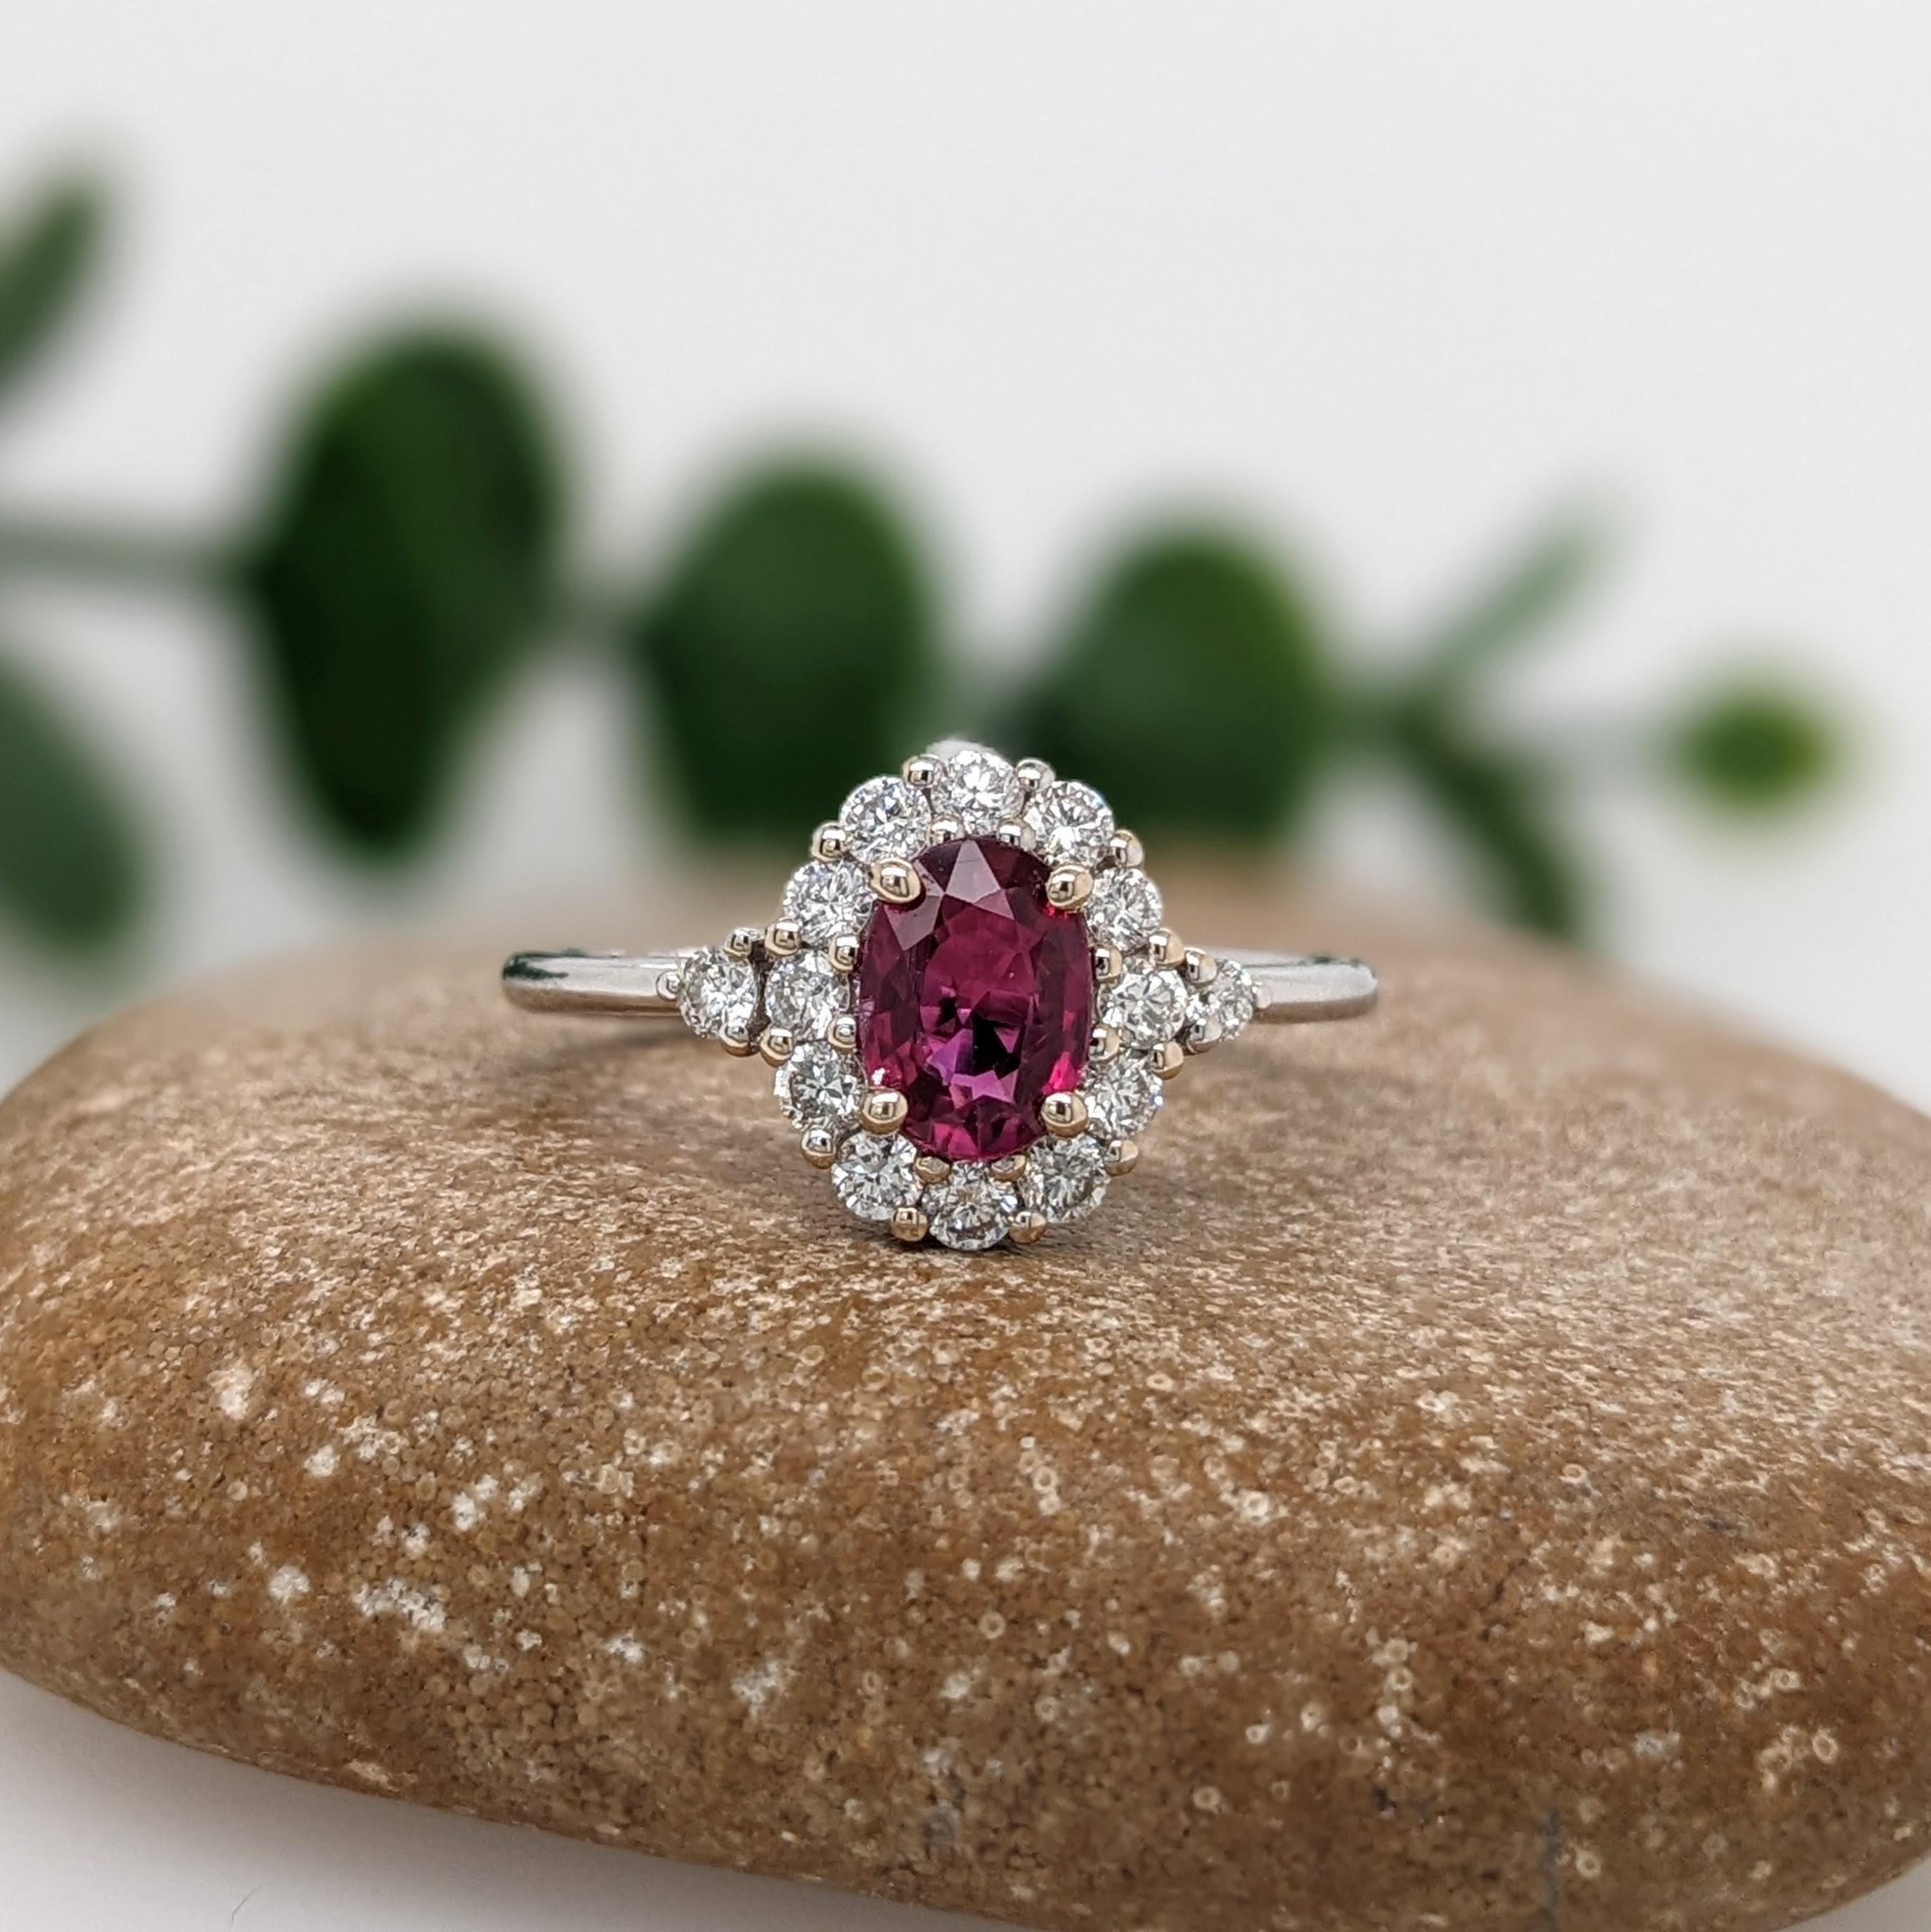 This gorgeous red ruby comes from Mozambique and looks stunning in a classic NNJ Design's setting with a halo of natural diamonds and a tapered shank. A polished design that looks good on anyone! Pair this gorgeous ruby with with any outfit of your